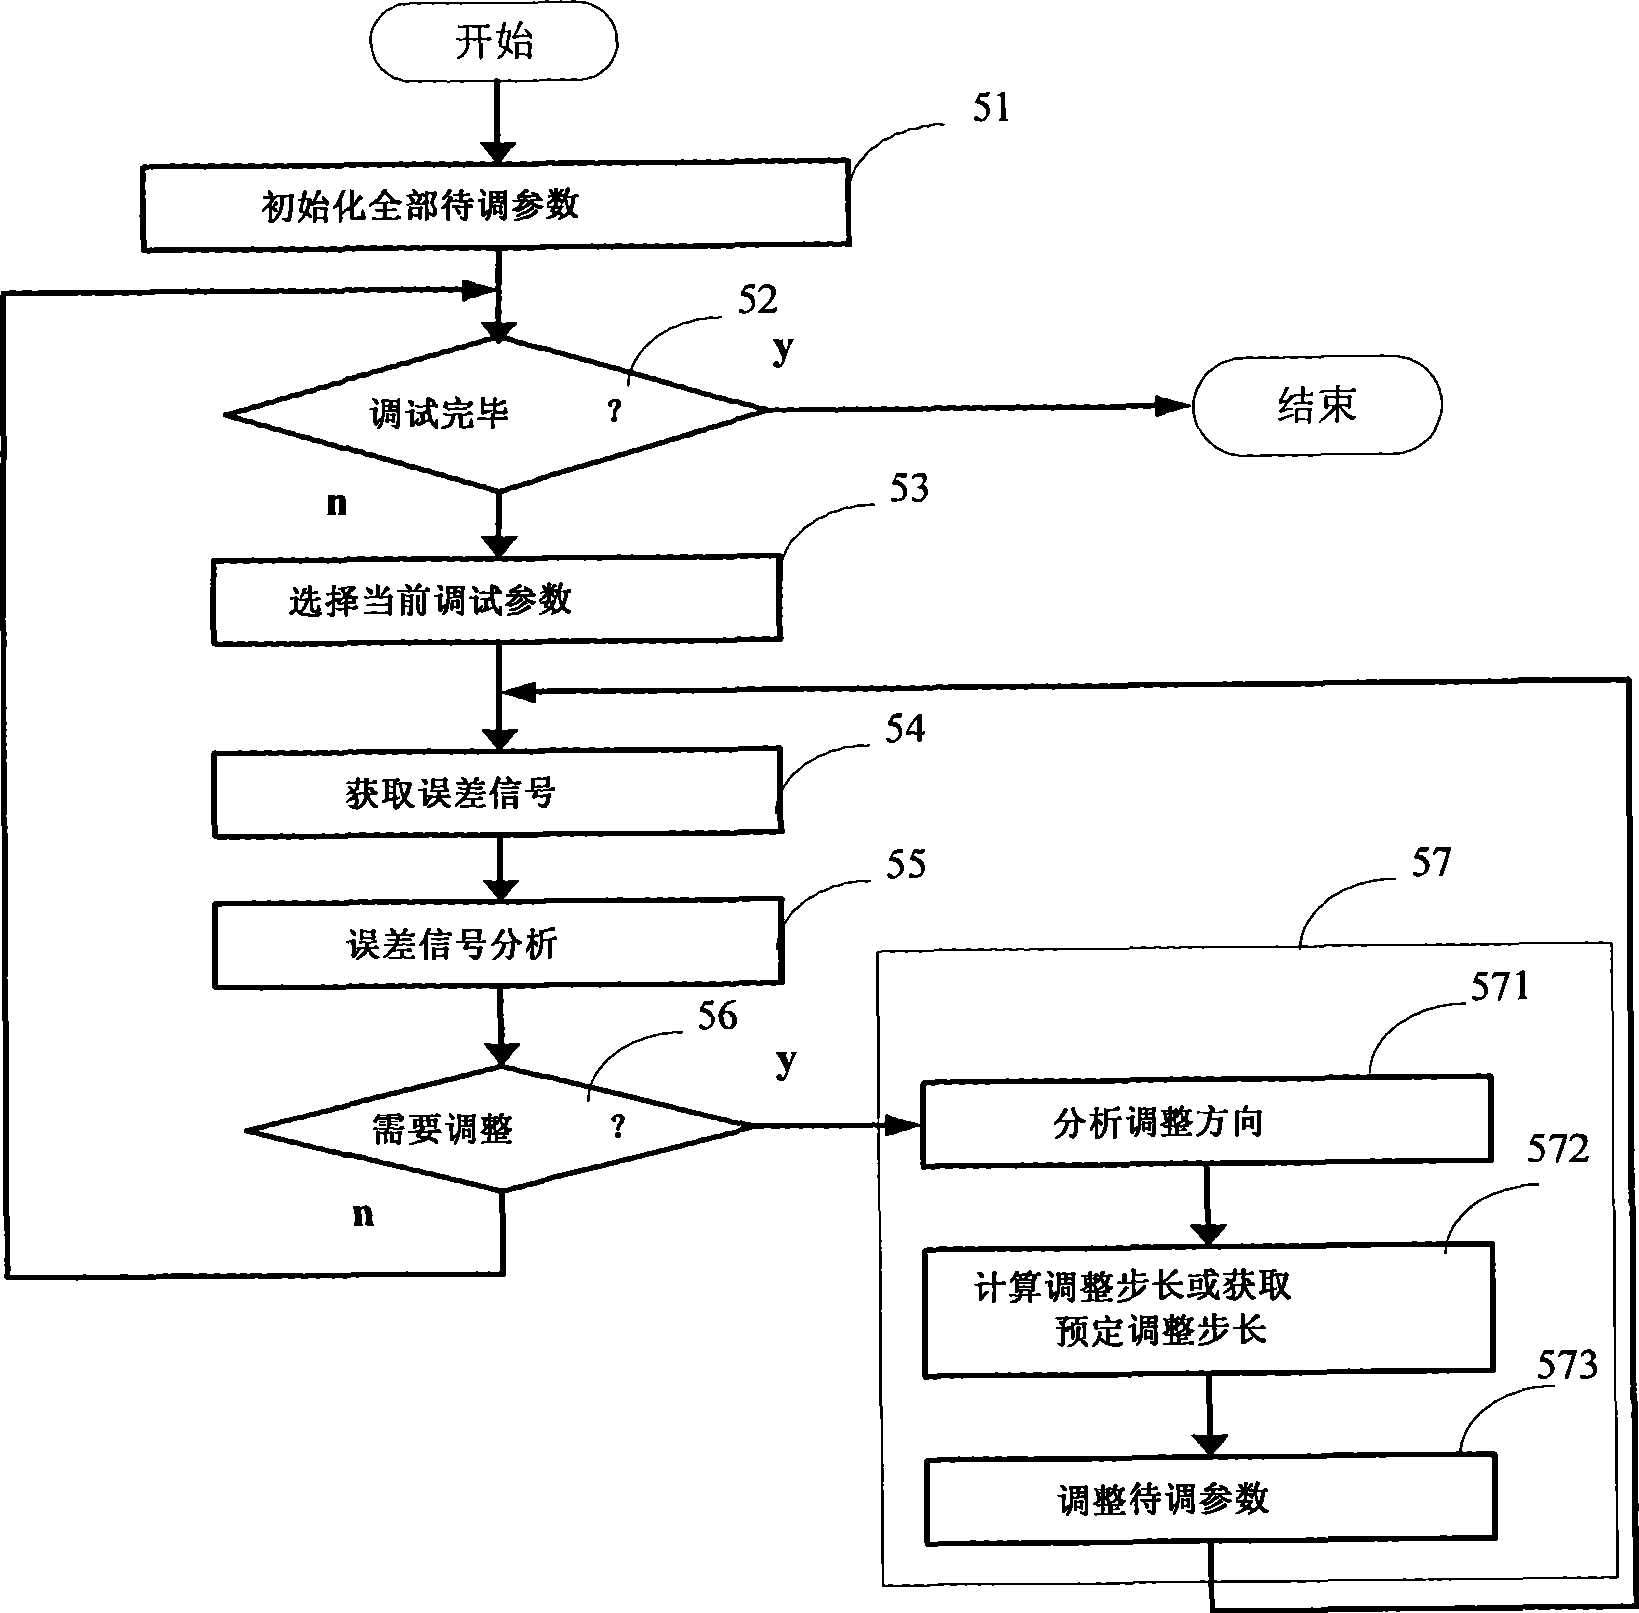 Apparatus and method for automatically debugging parameter of communication system